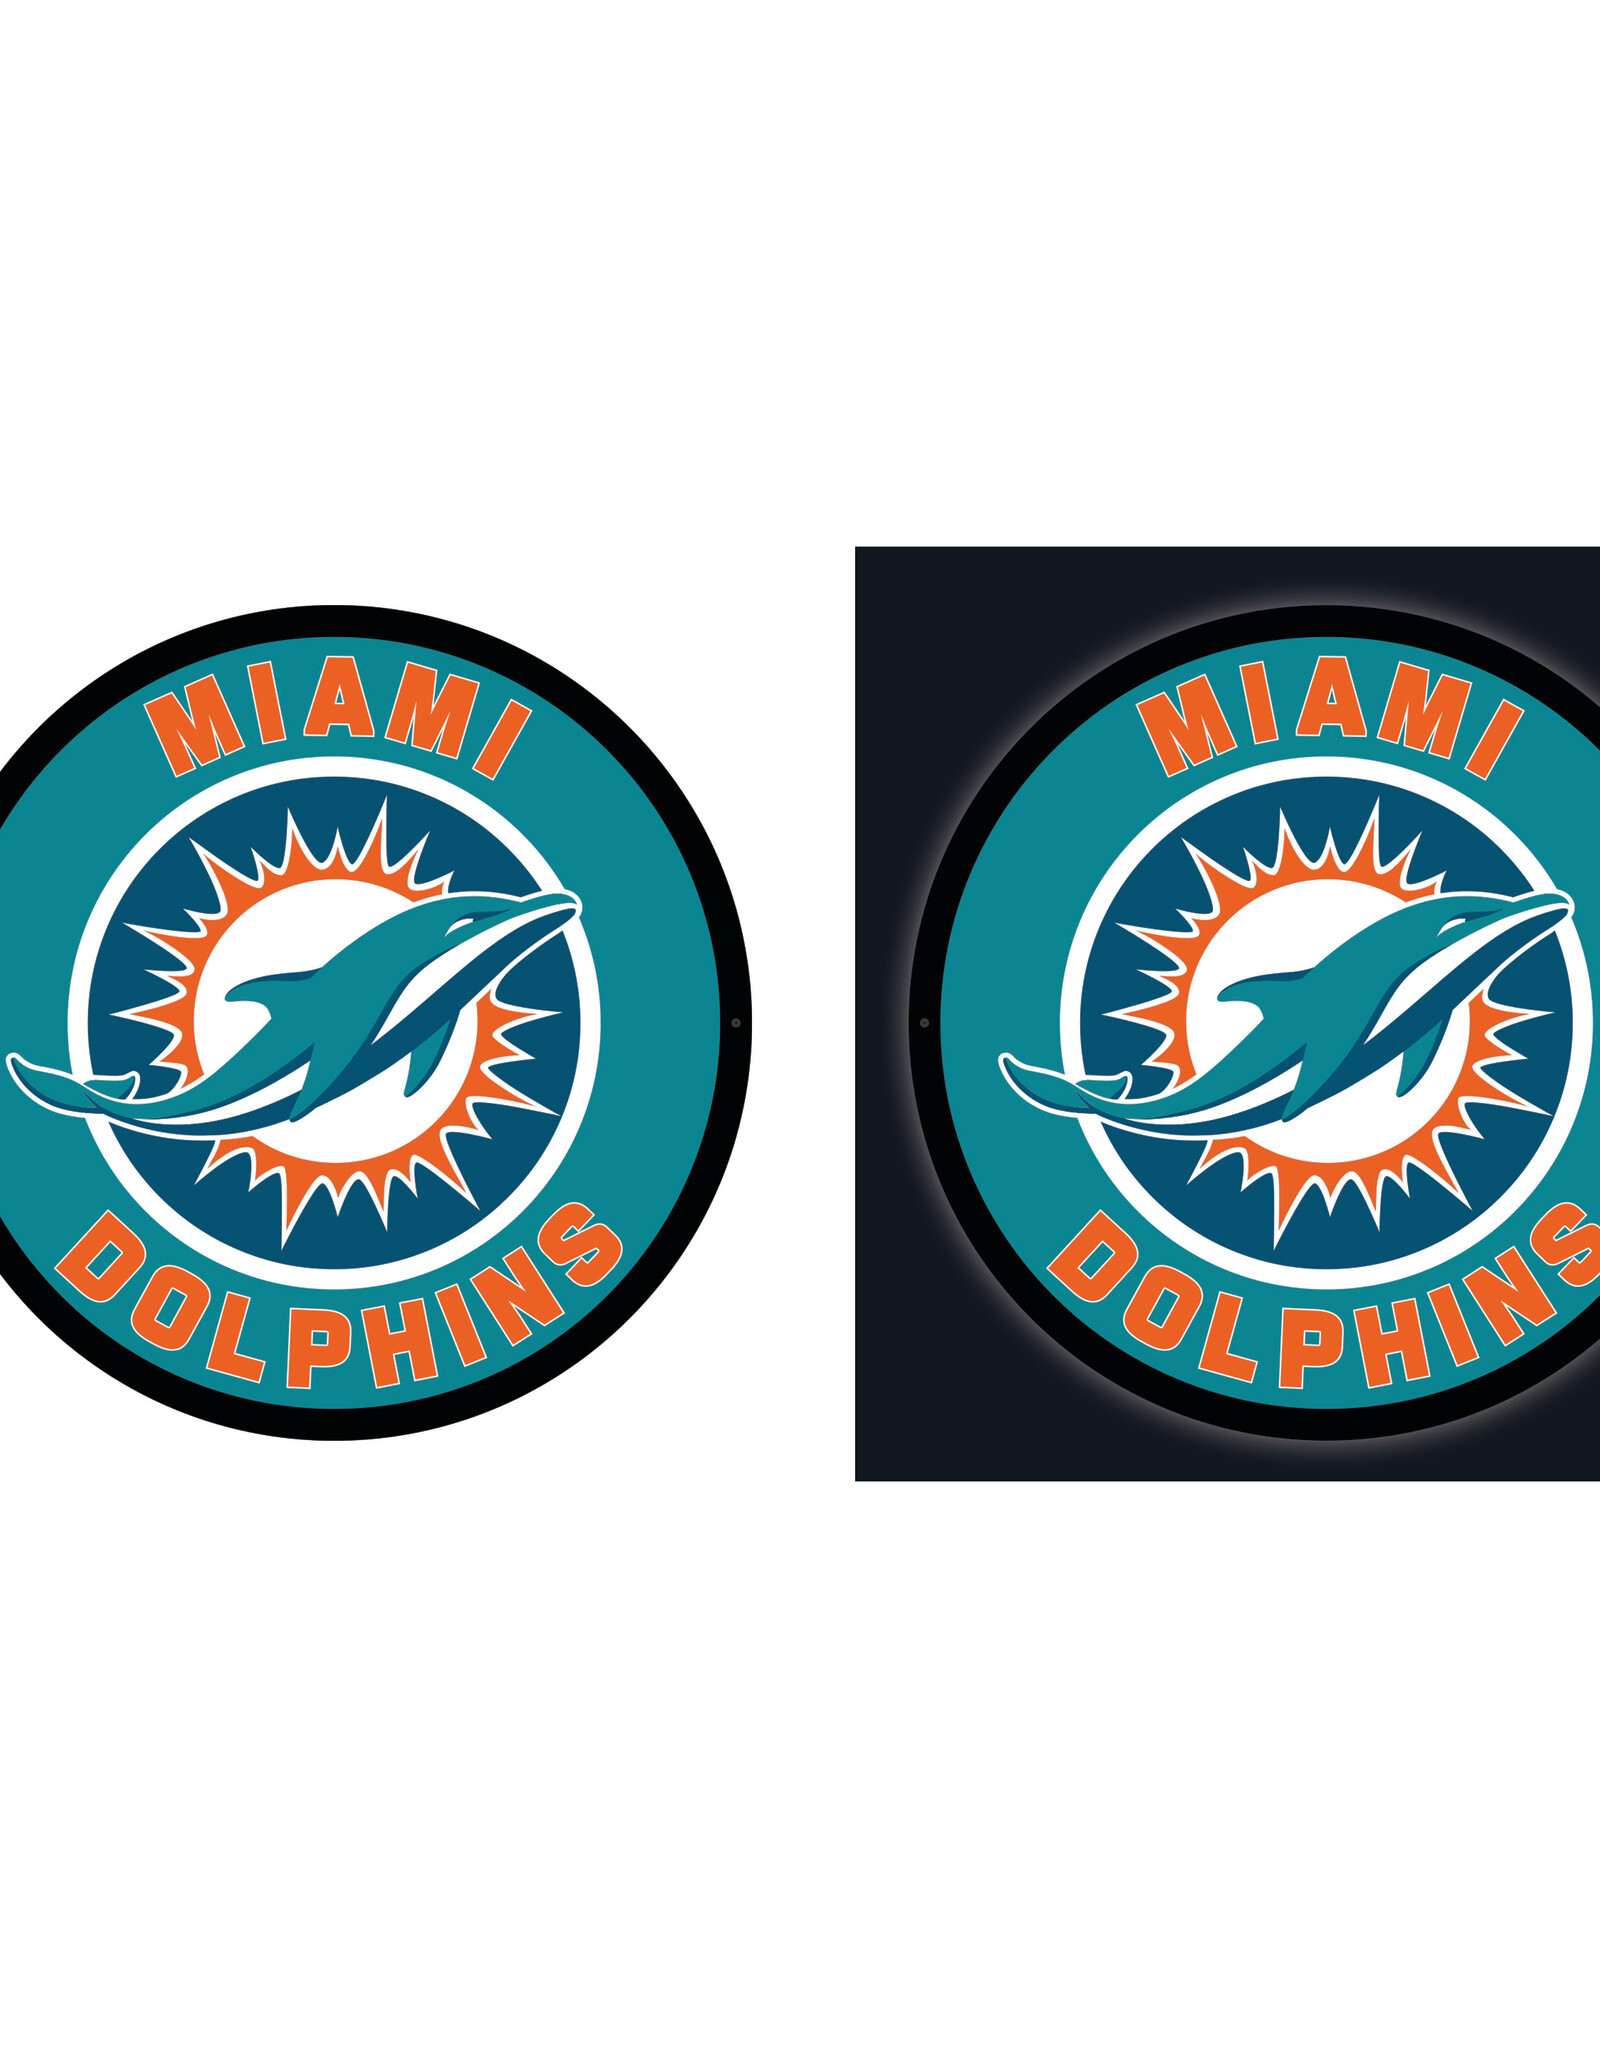 EVERGREEN Miami Dolphins Lighted LED Round Wall Decor